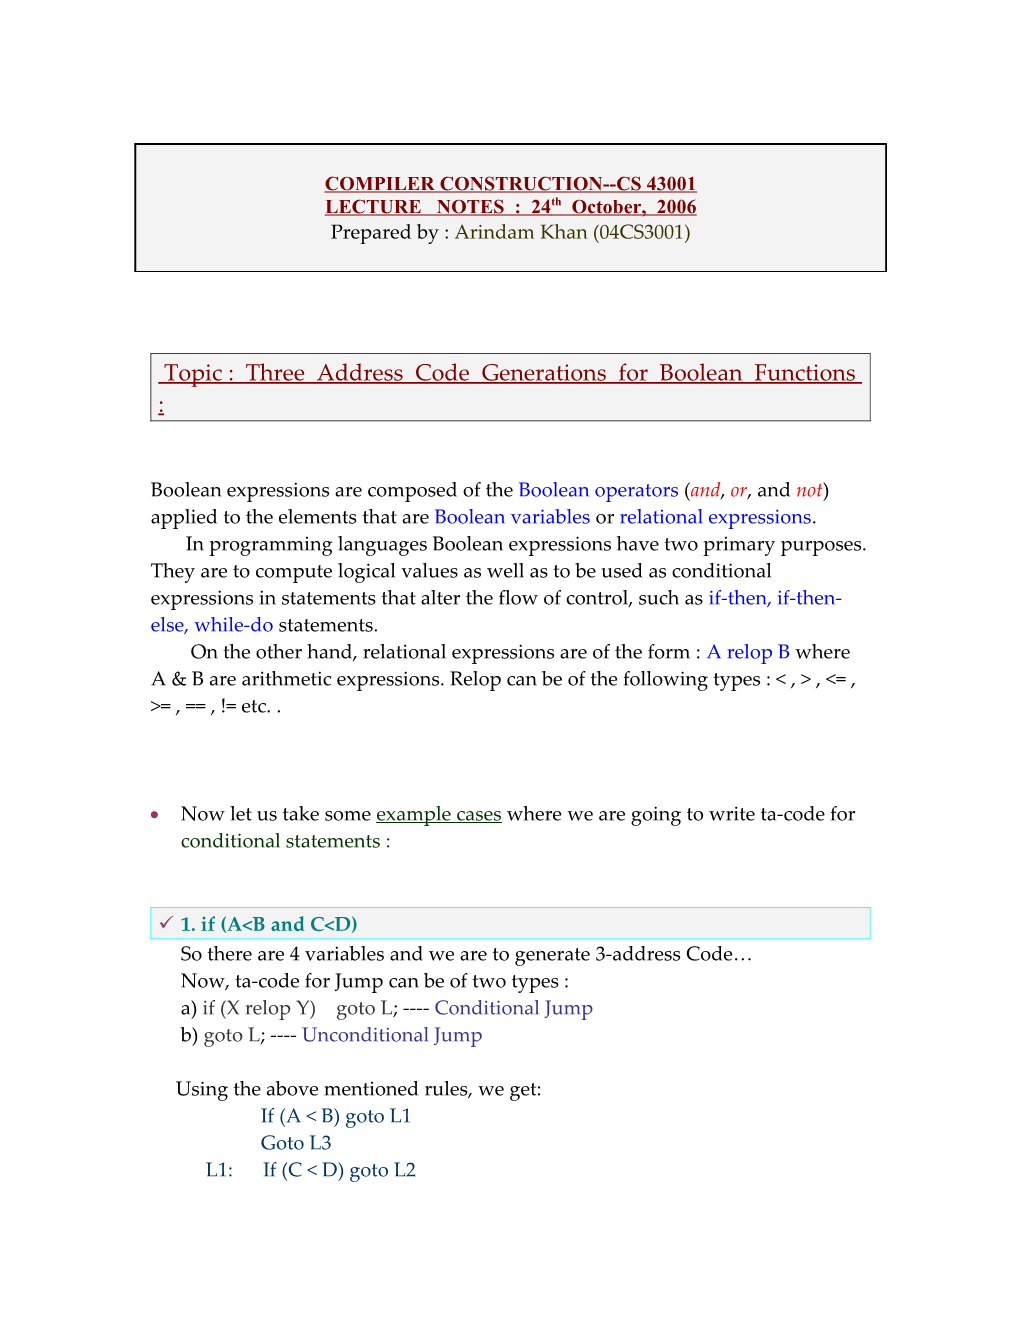 Topic : Three Address Code Generations for Boolean Functions